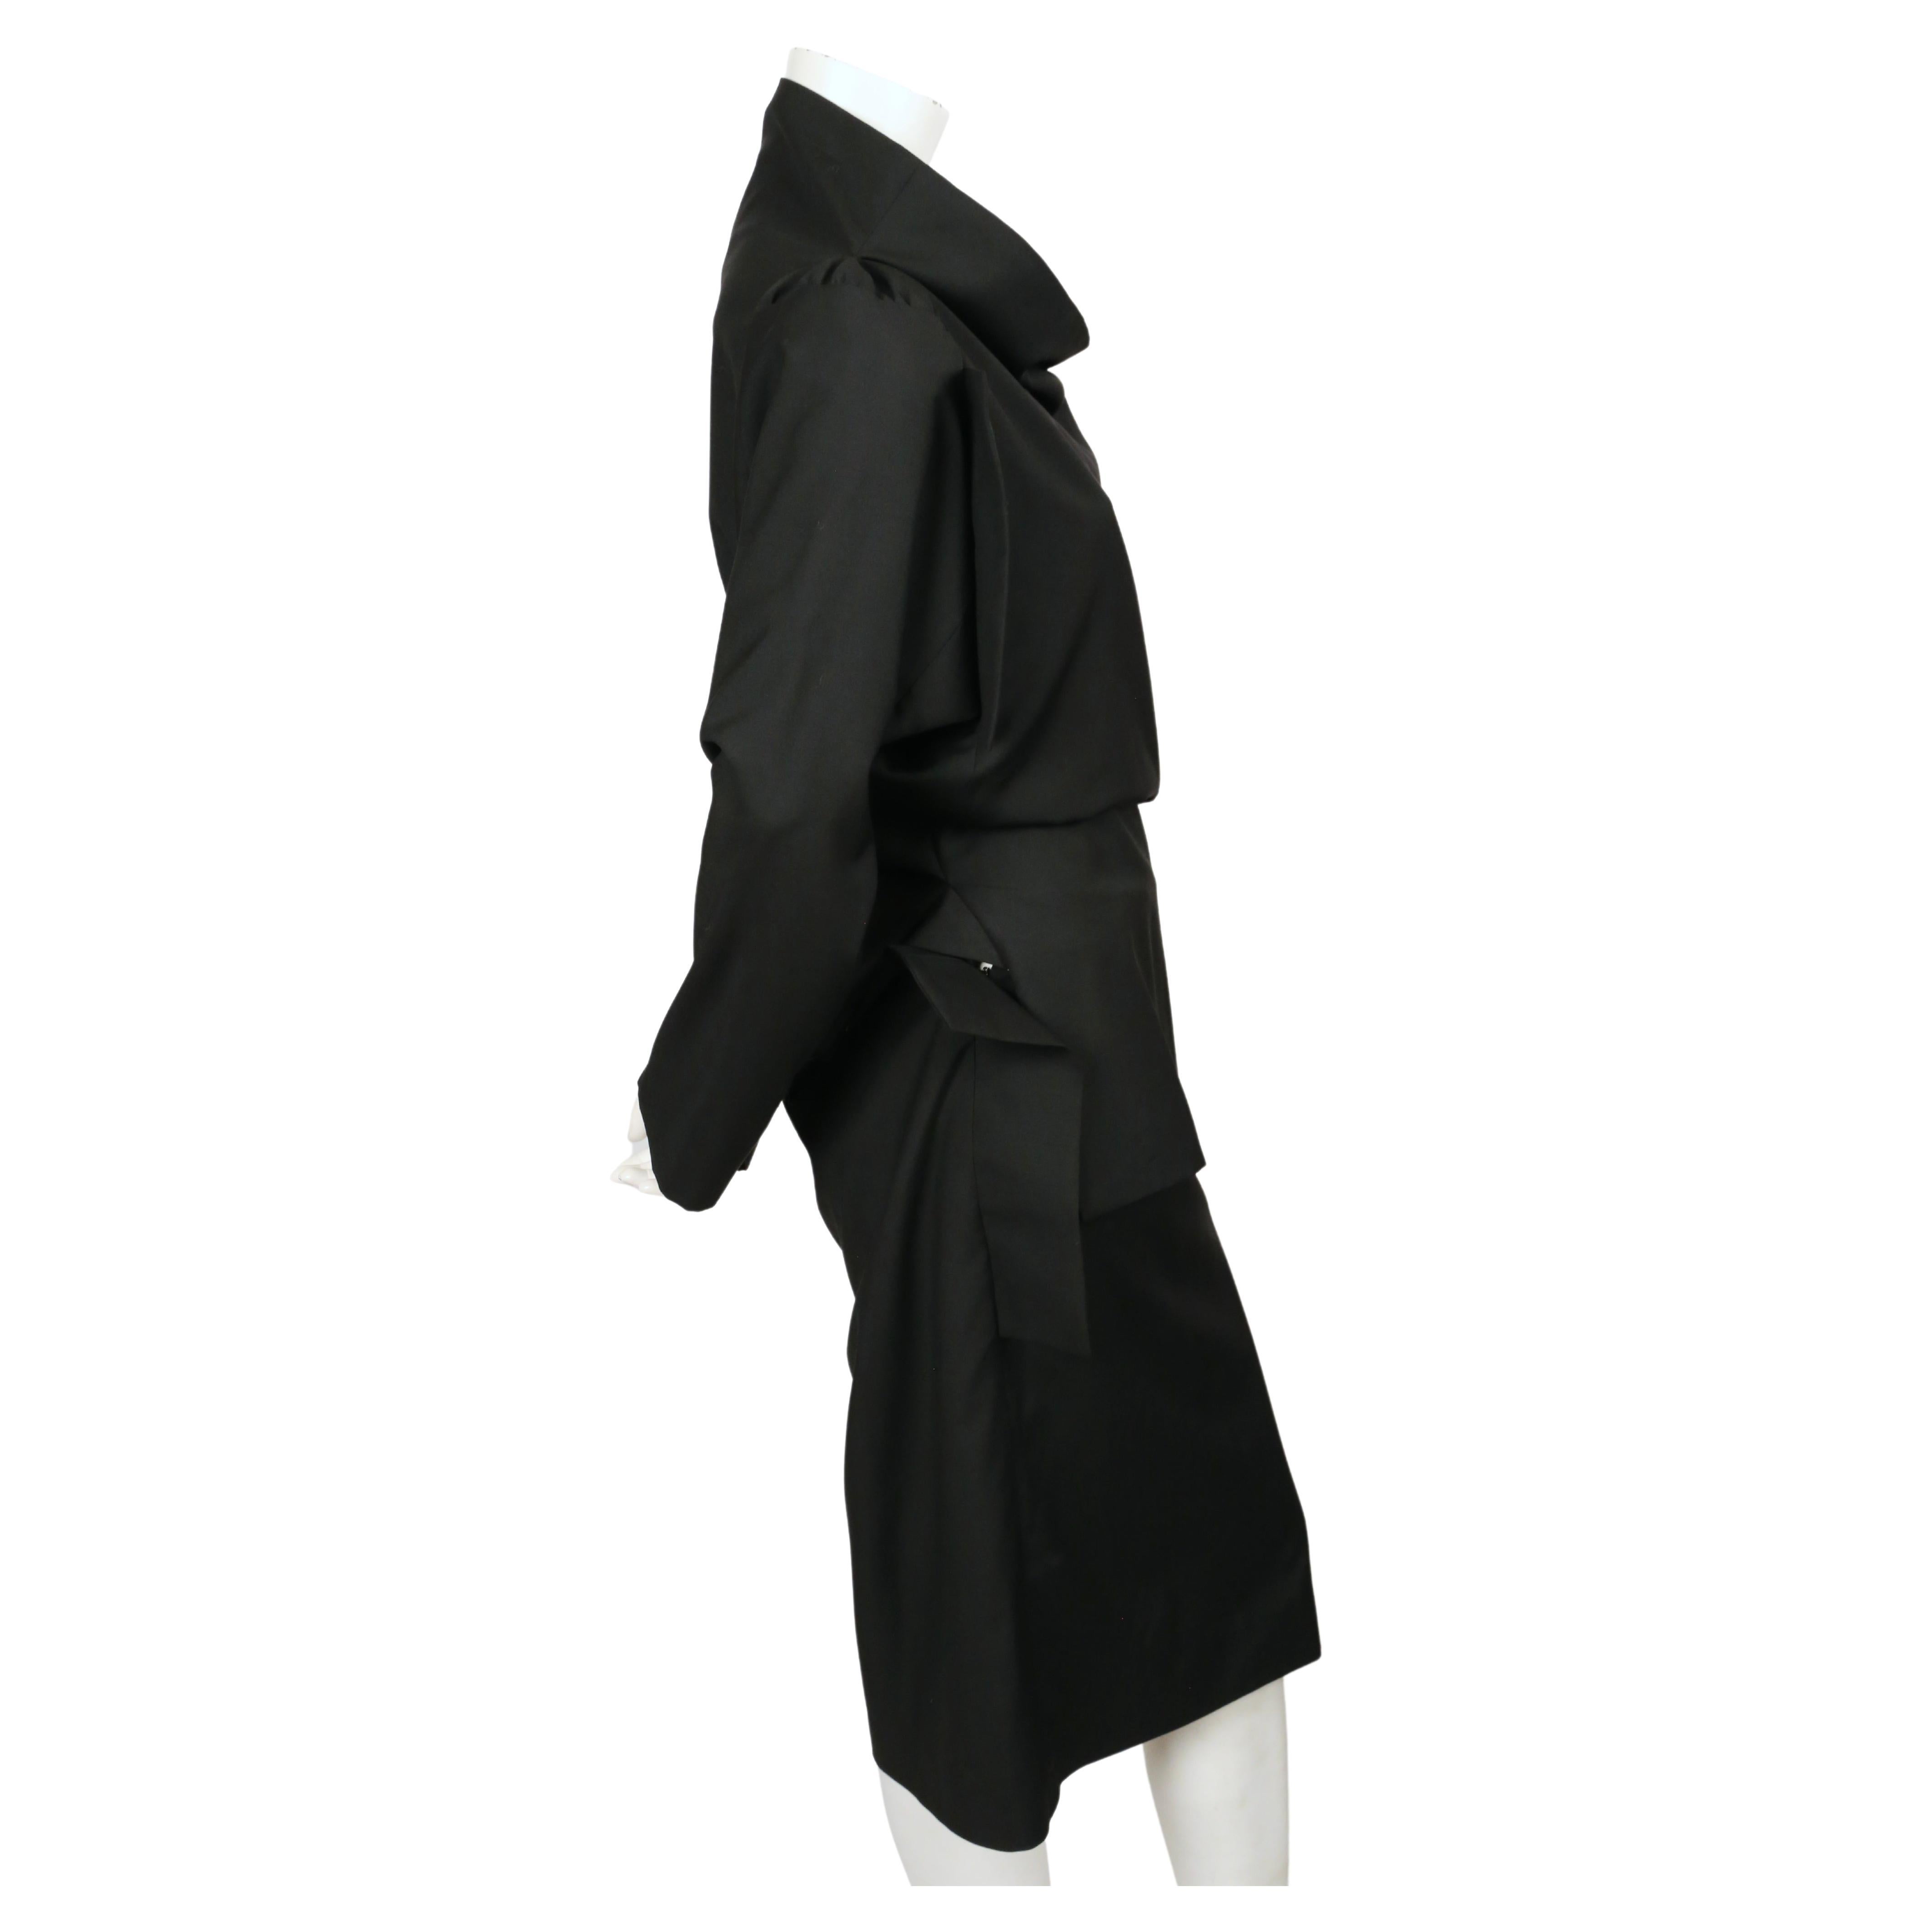 Women's or Men's VIVIENNE WESTWOOD black draped top and skirt suit For Sale